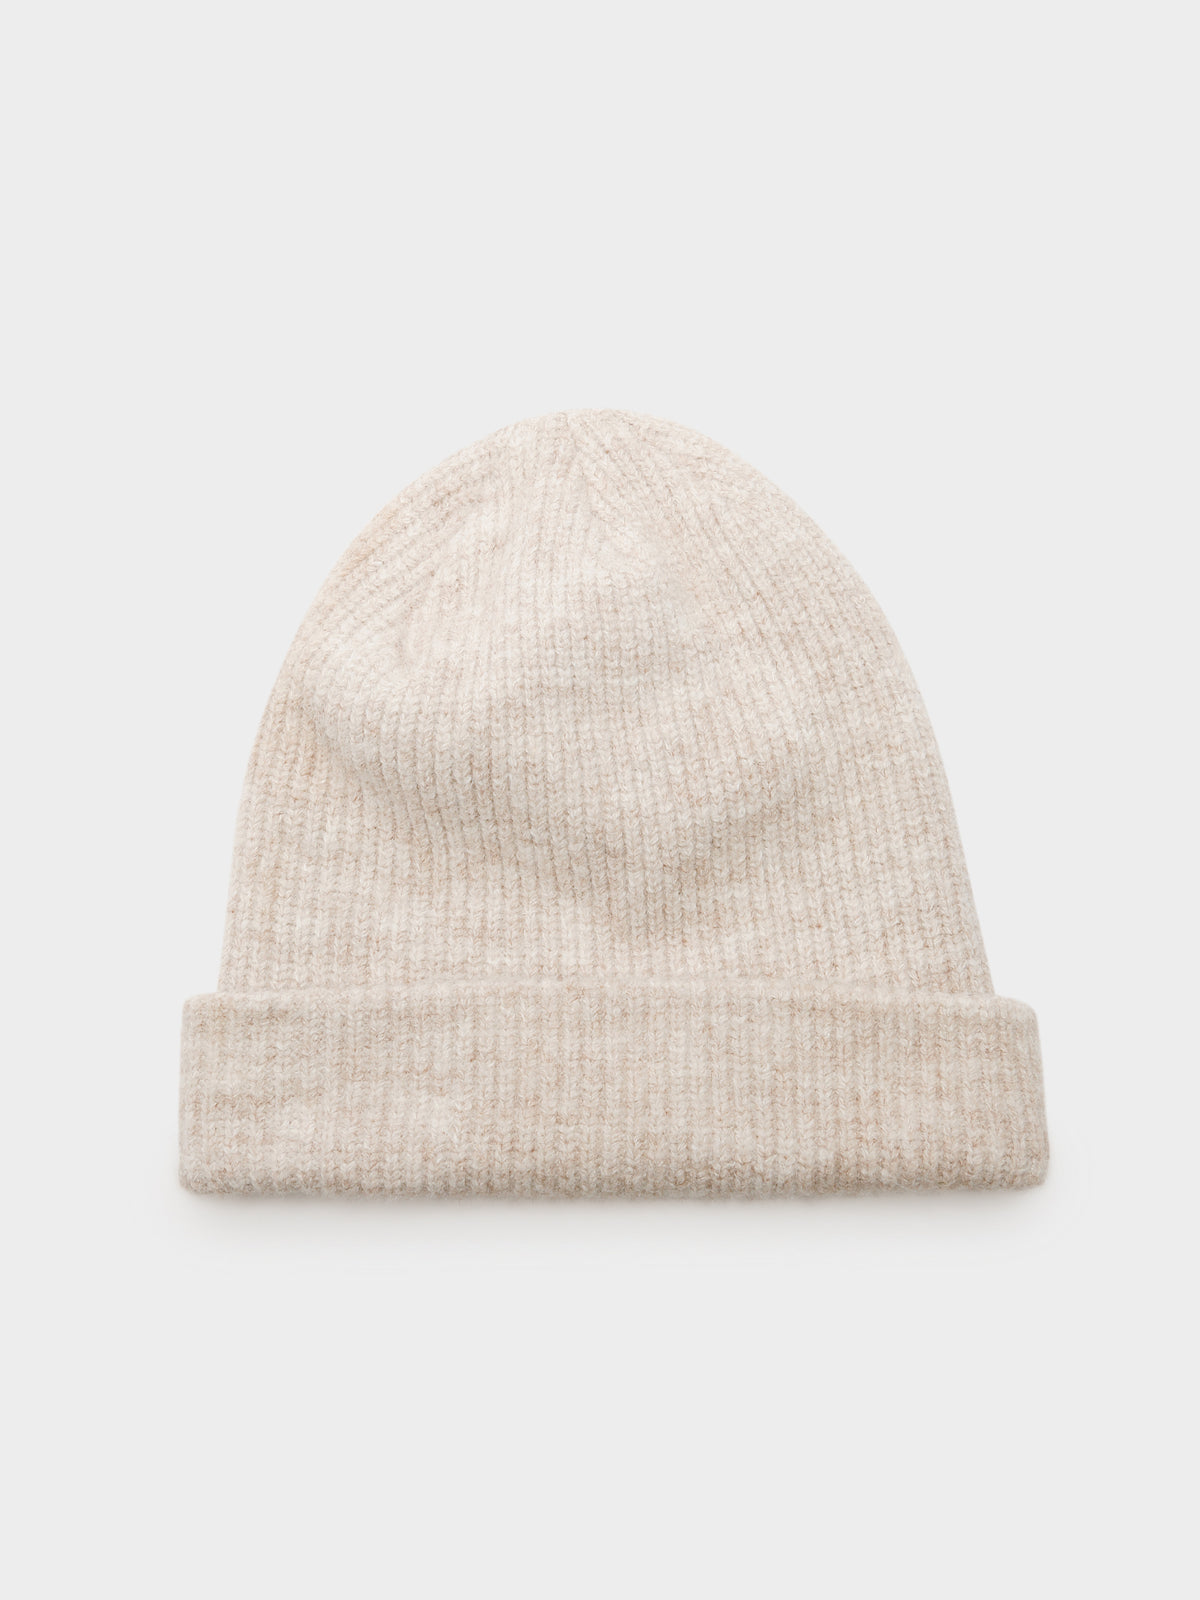 Nude Lucy Classic Beanie in Natural Marle